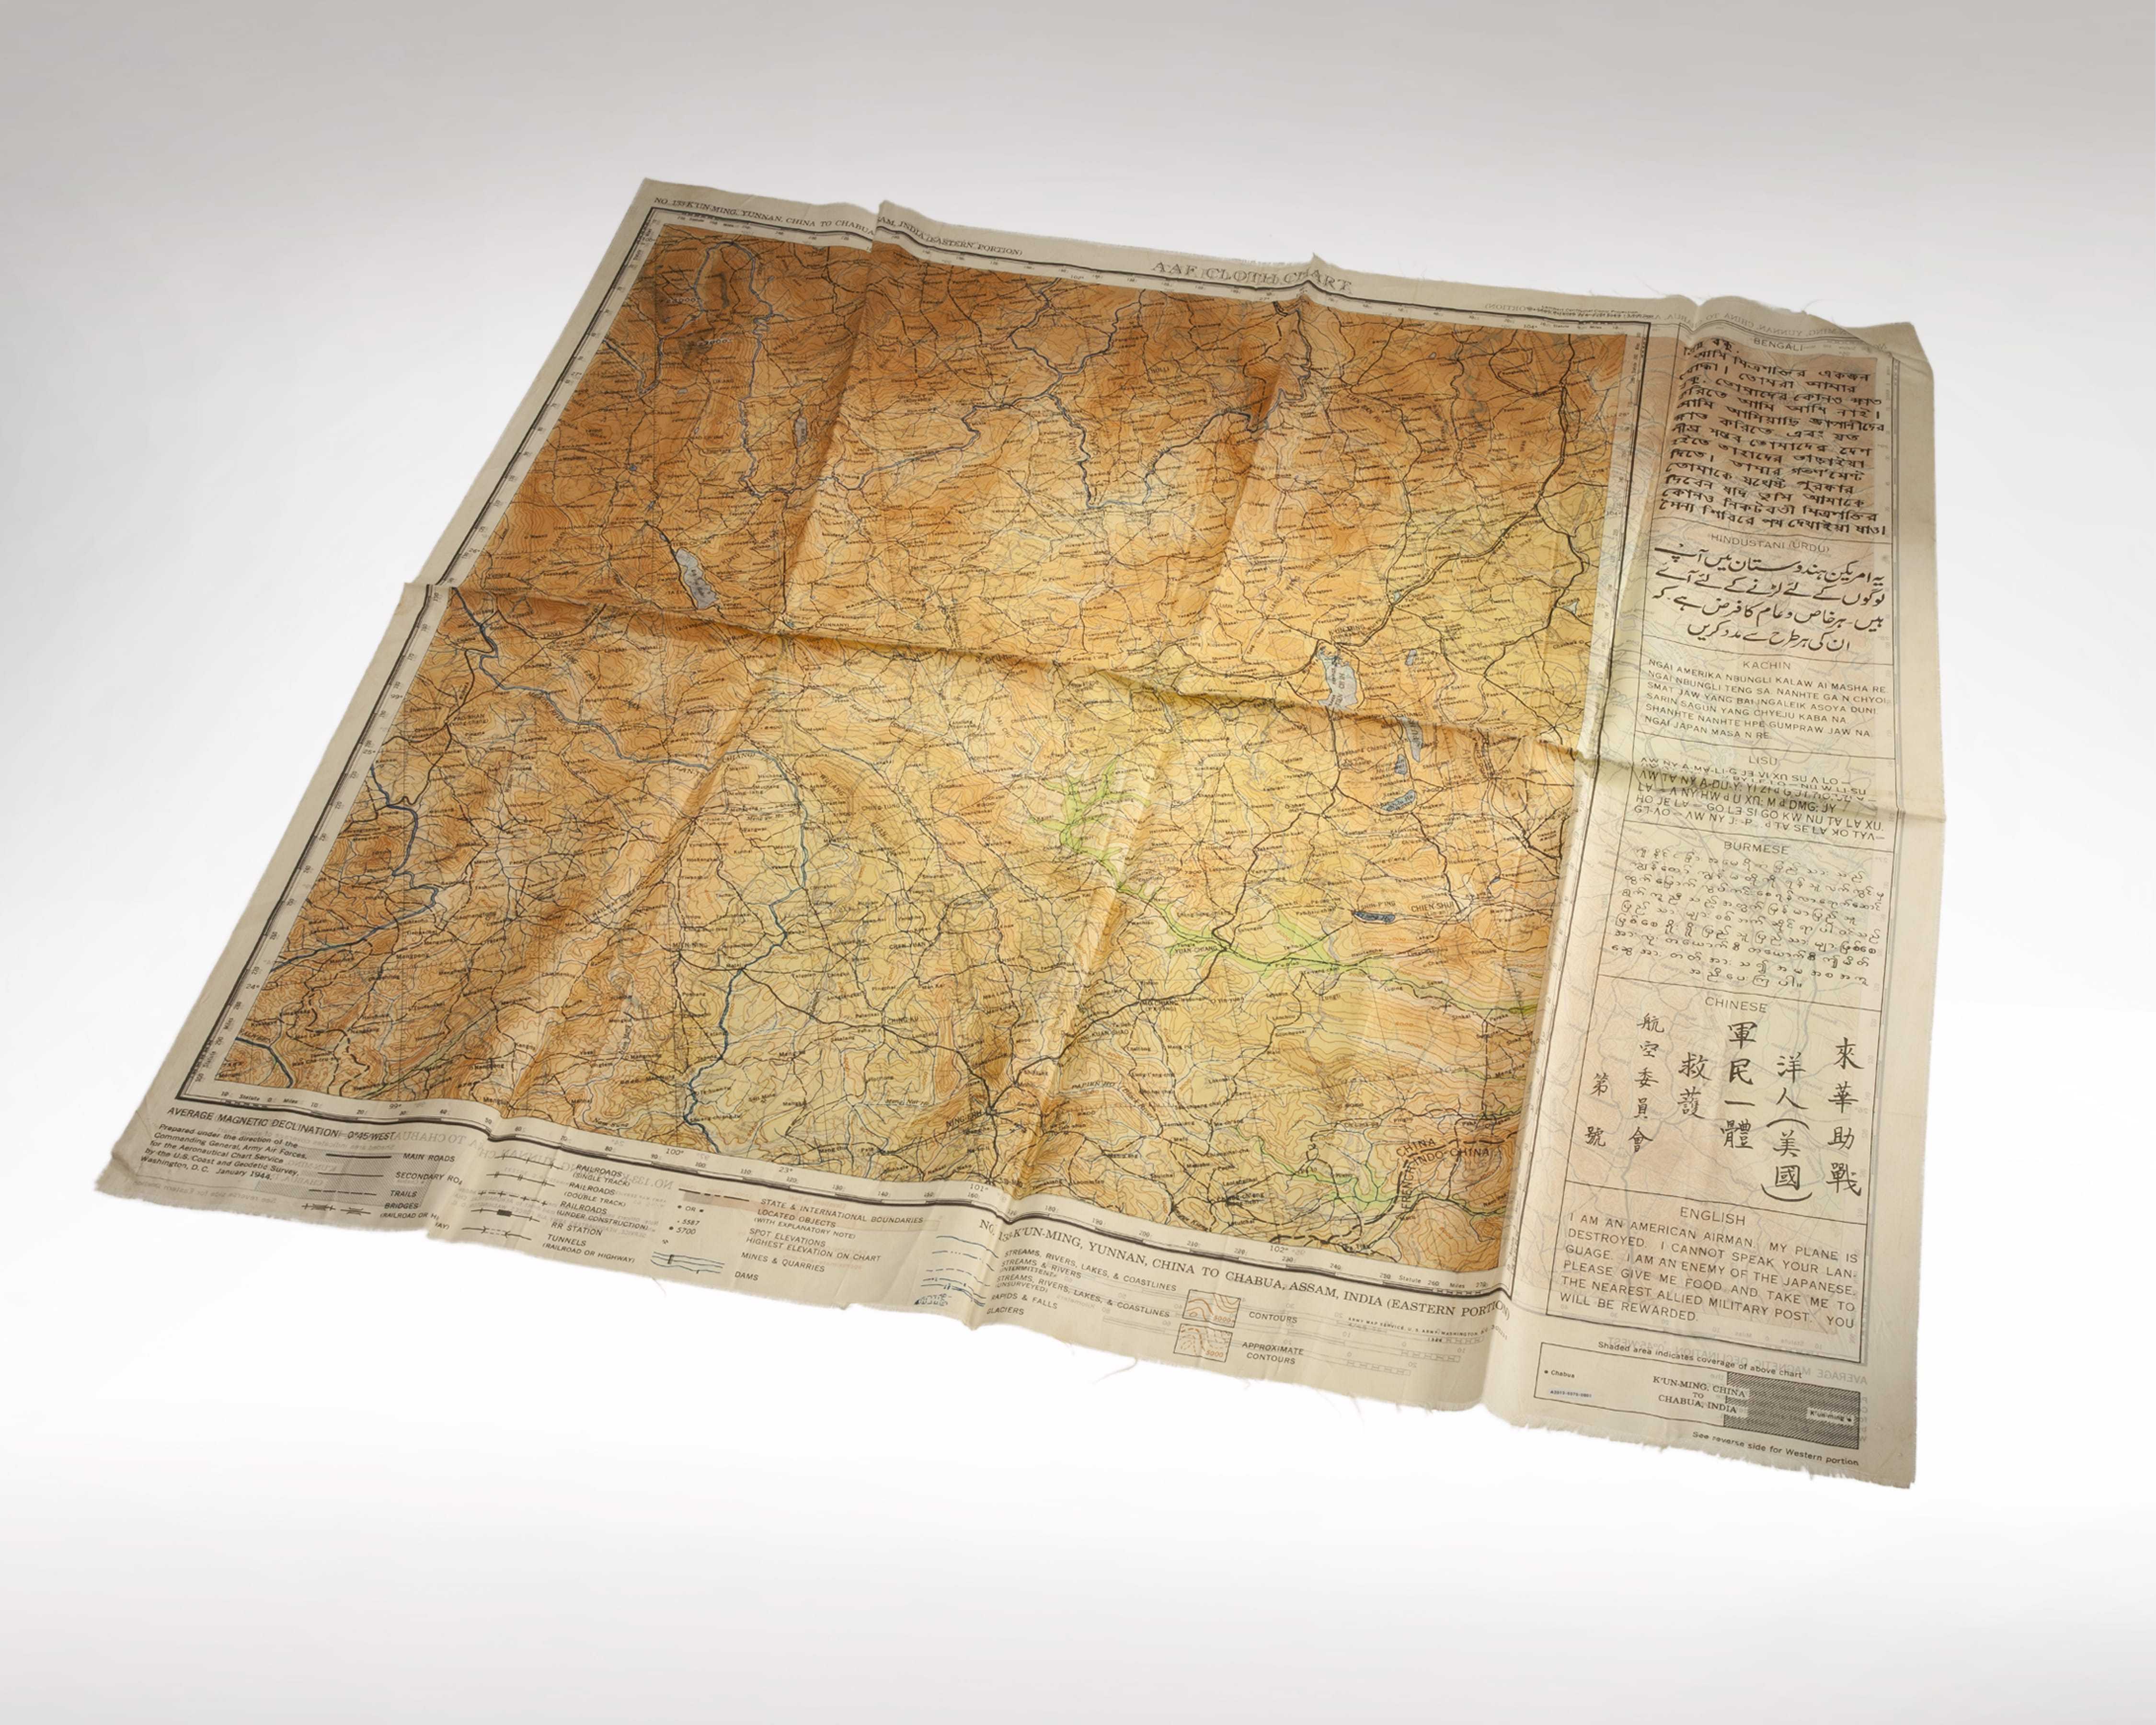 A large map printed on silk with information in multiple languages printed alongside